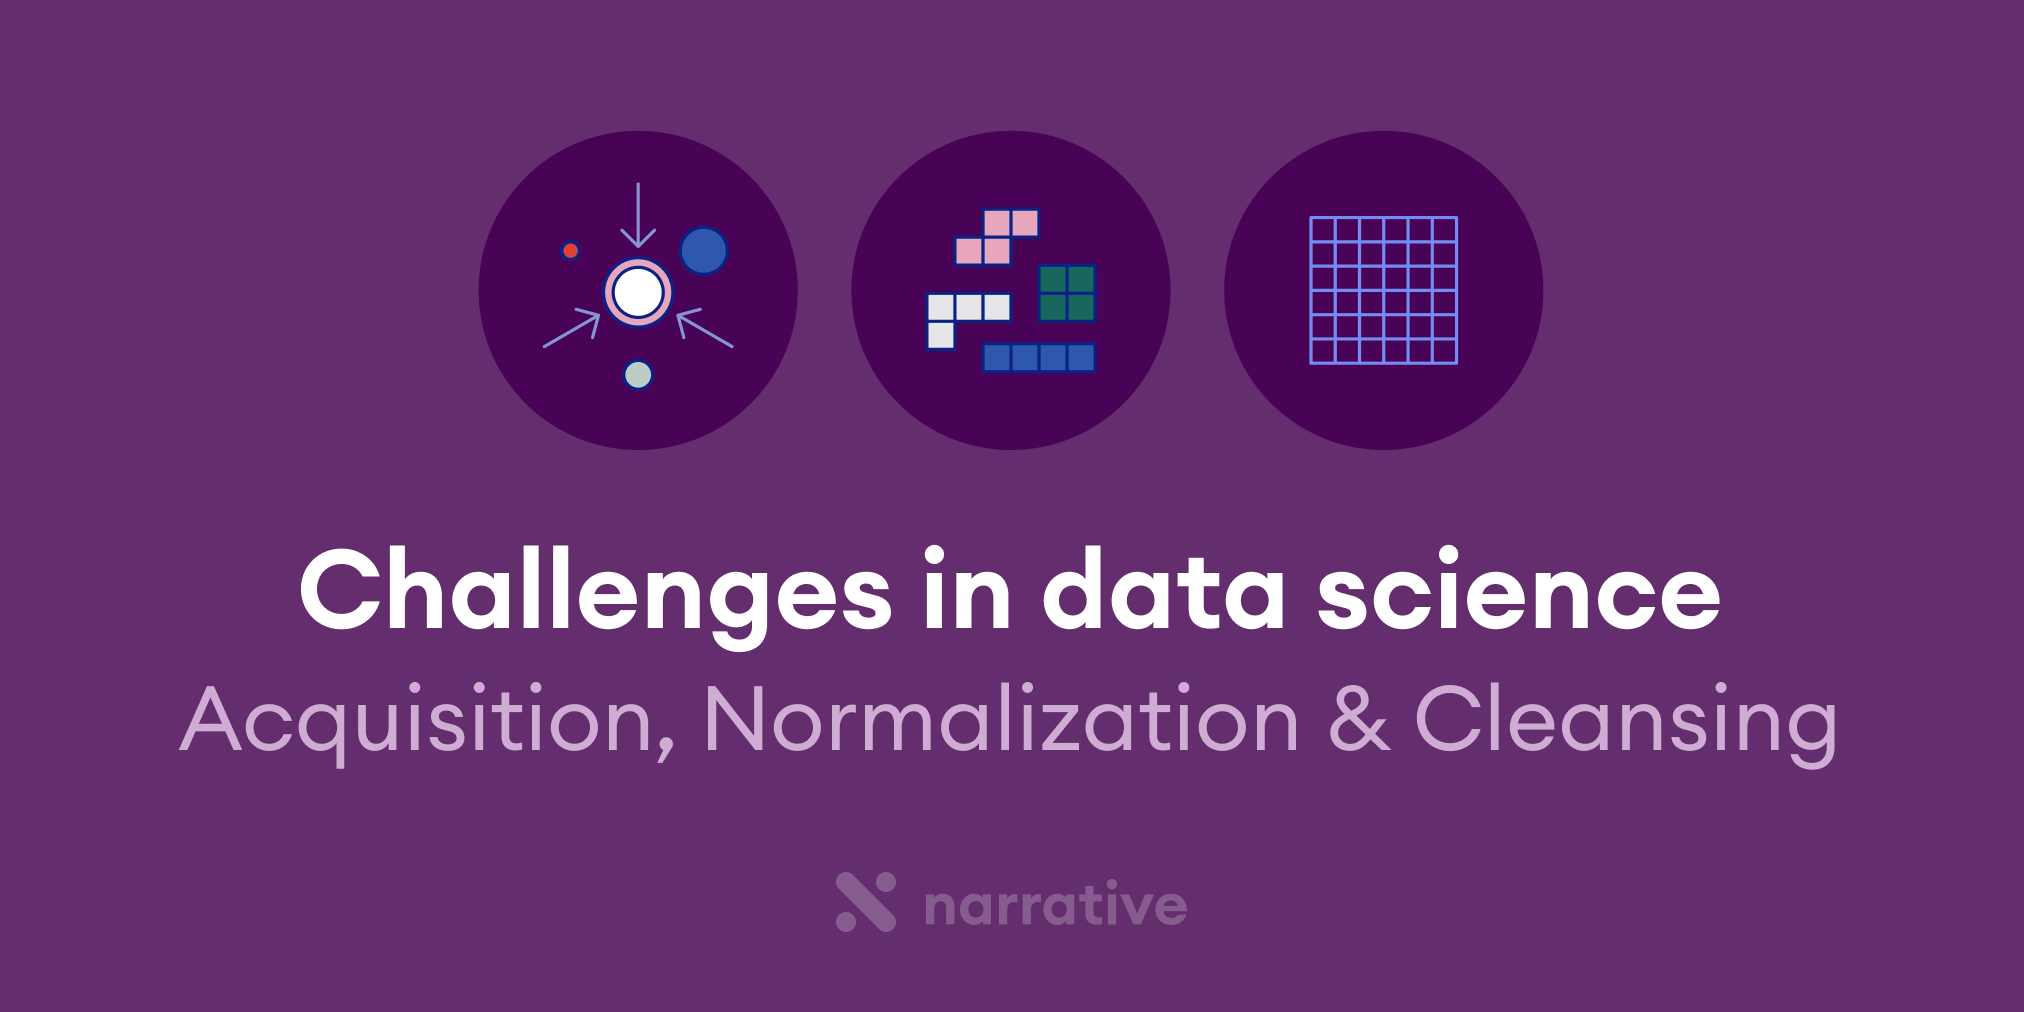 Challenges in Data Science: Acquisition, Normalization & Cleansing